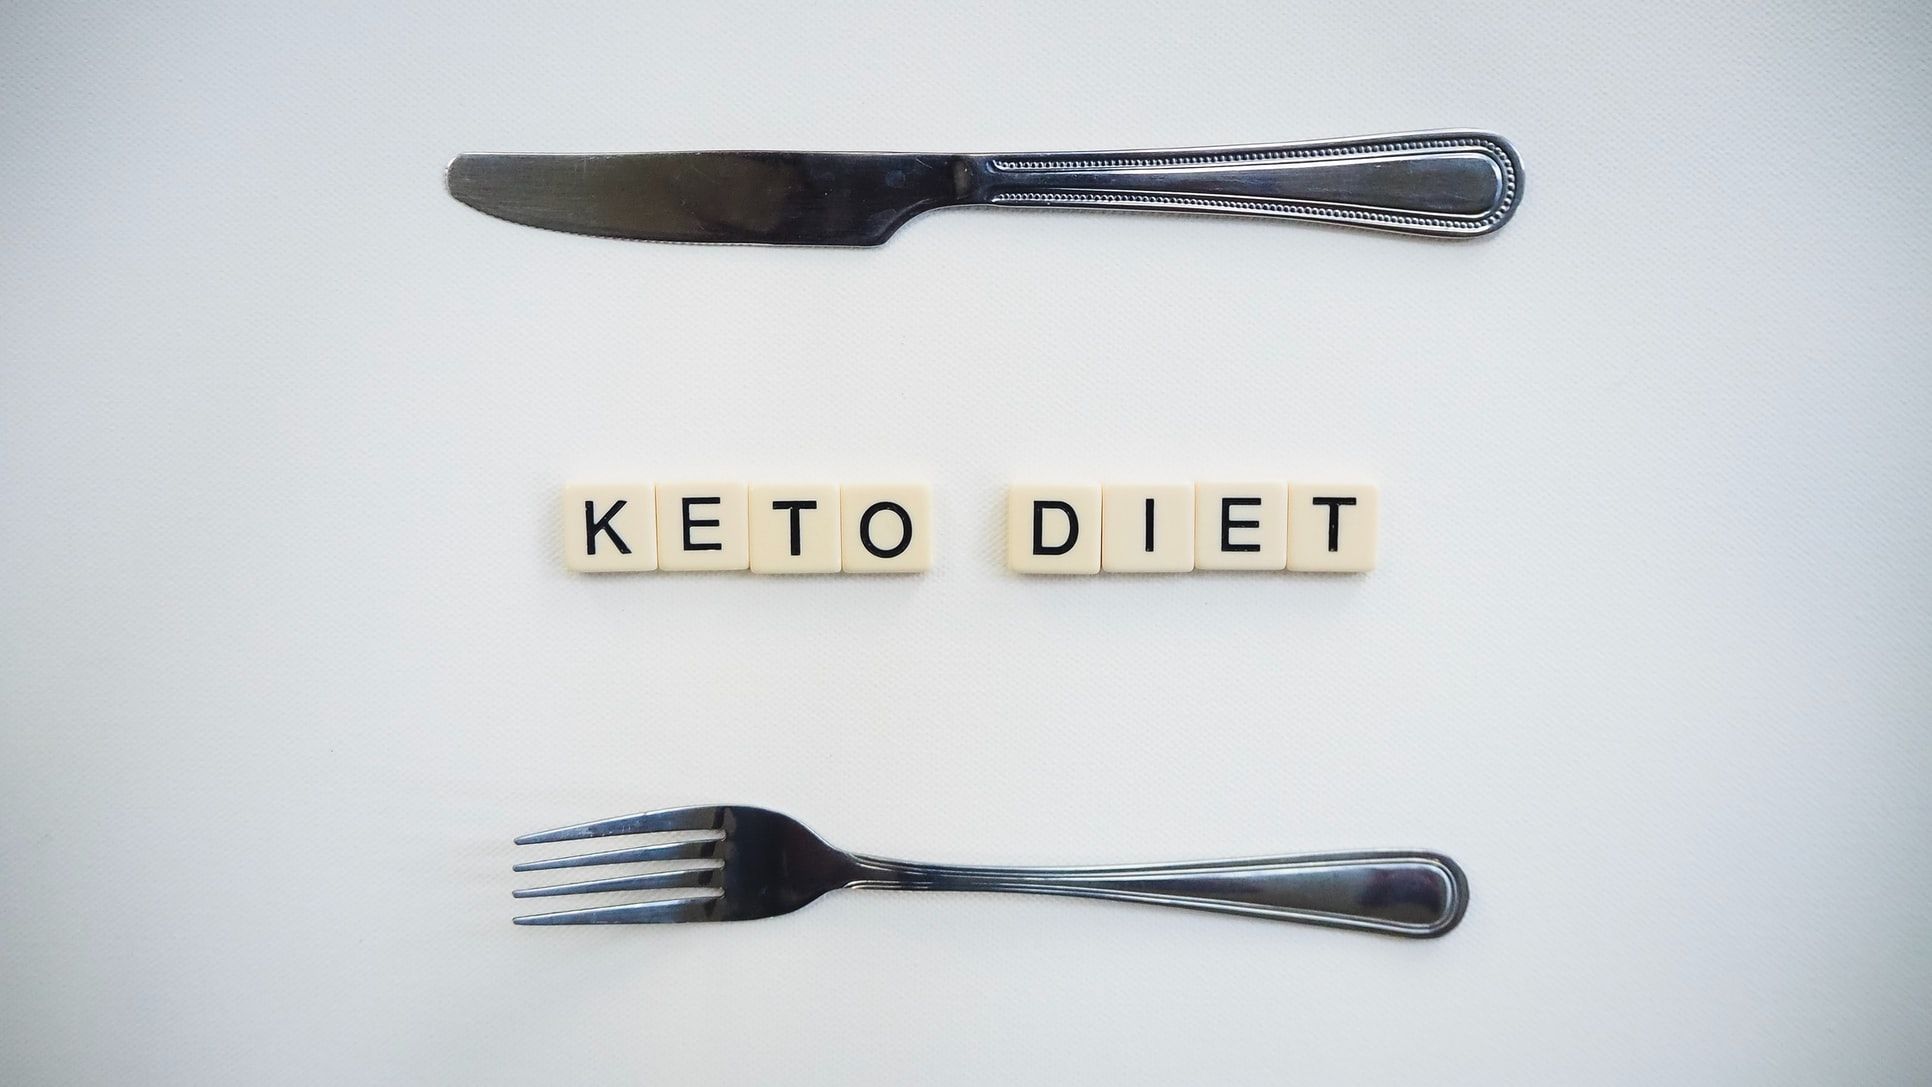 Keto diet may damage your hair and skin before you shed extra pounds